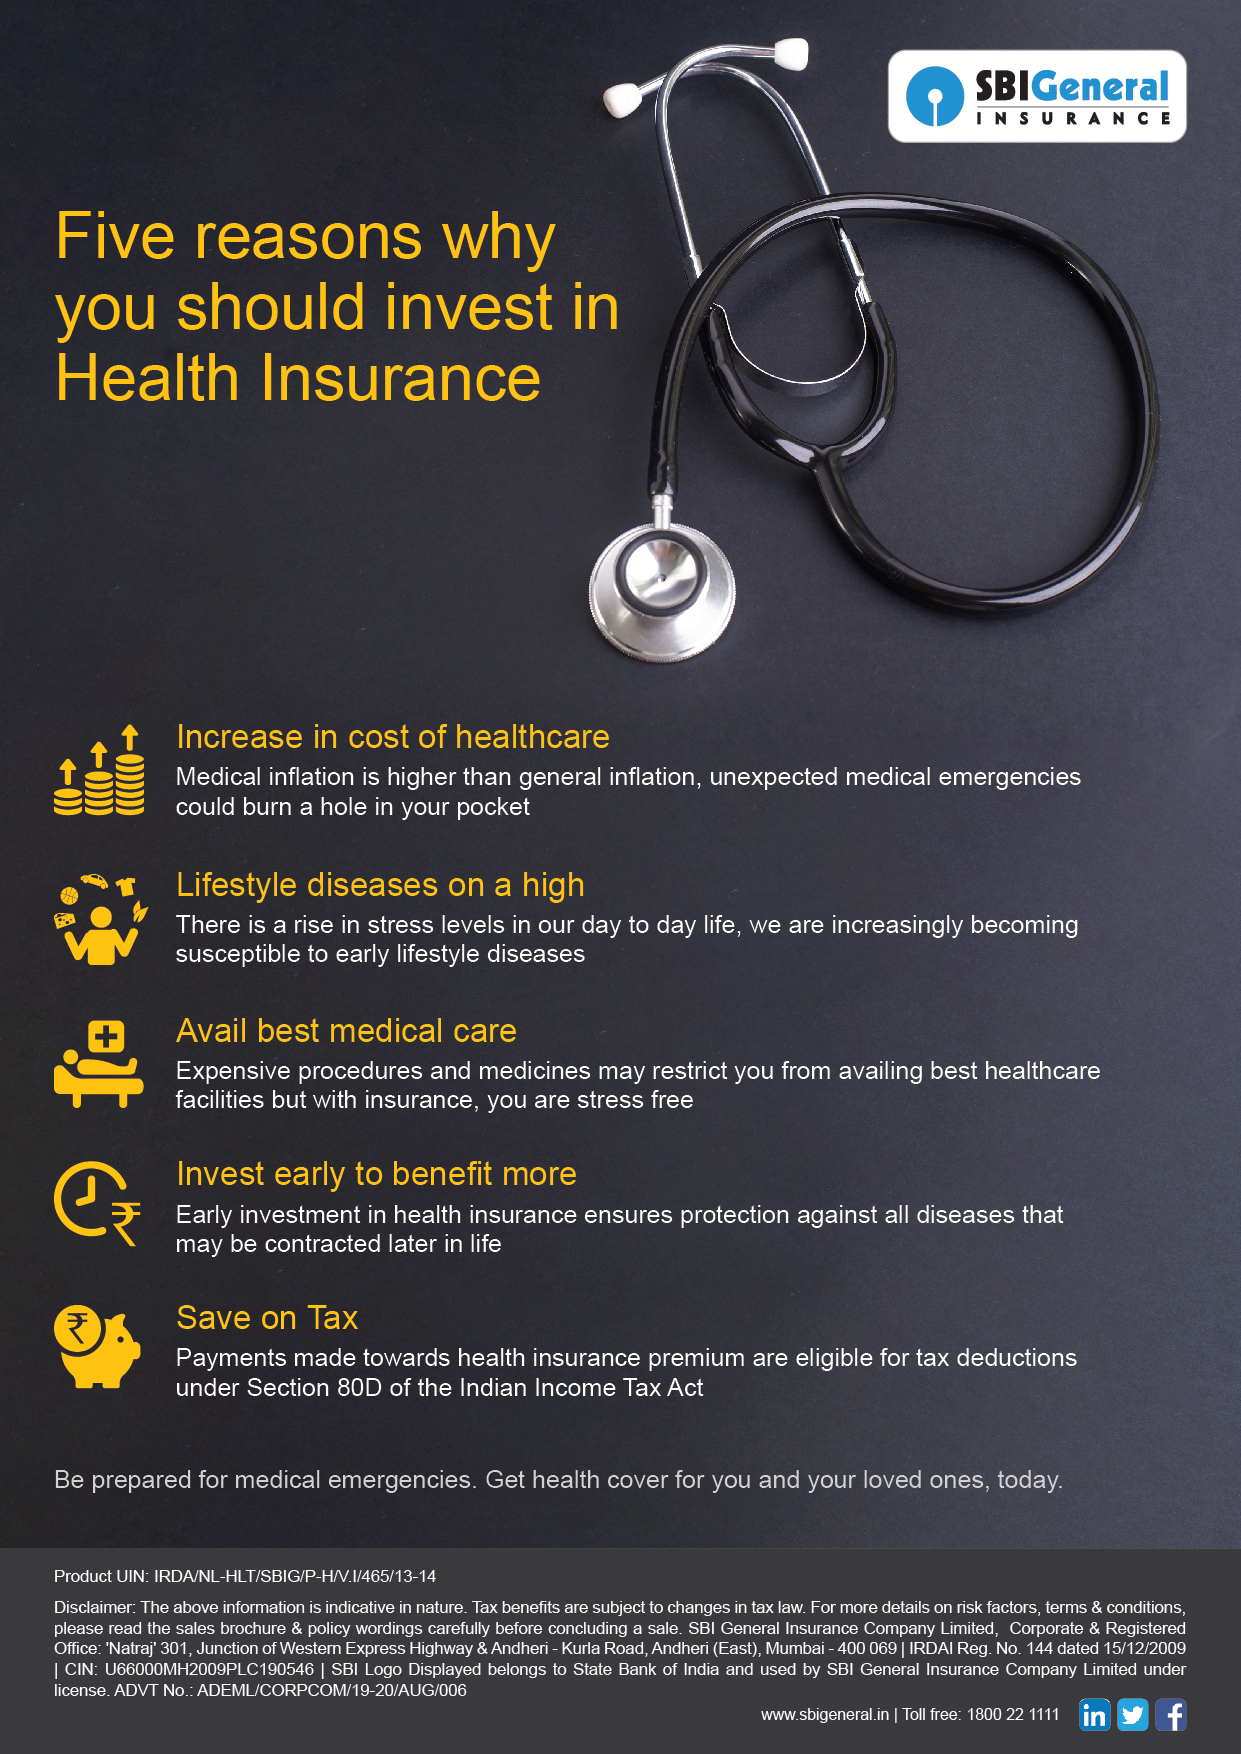 Five Reasons Why You Should Invest In Health Insurance